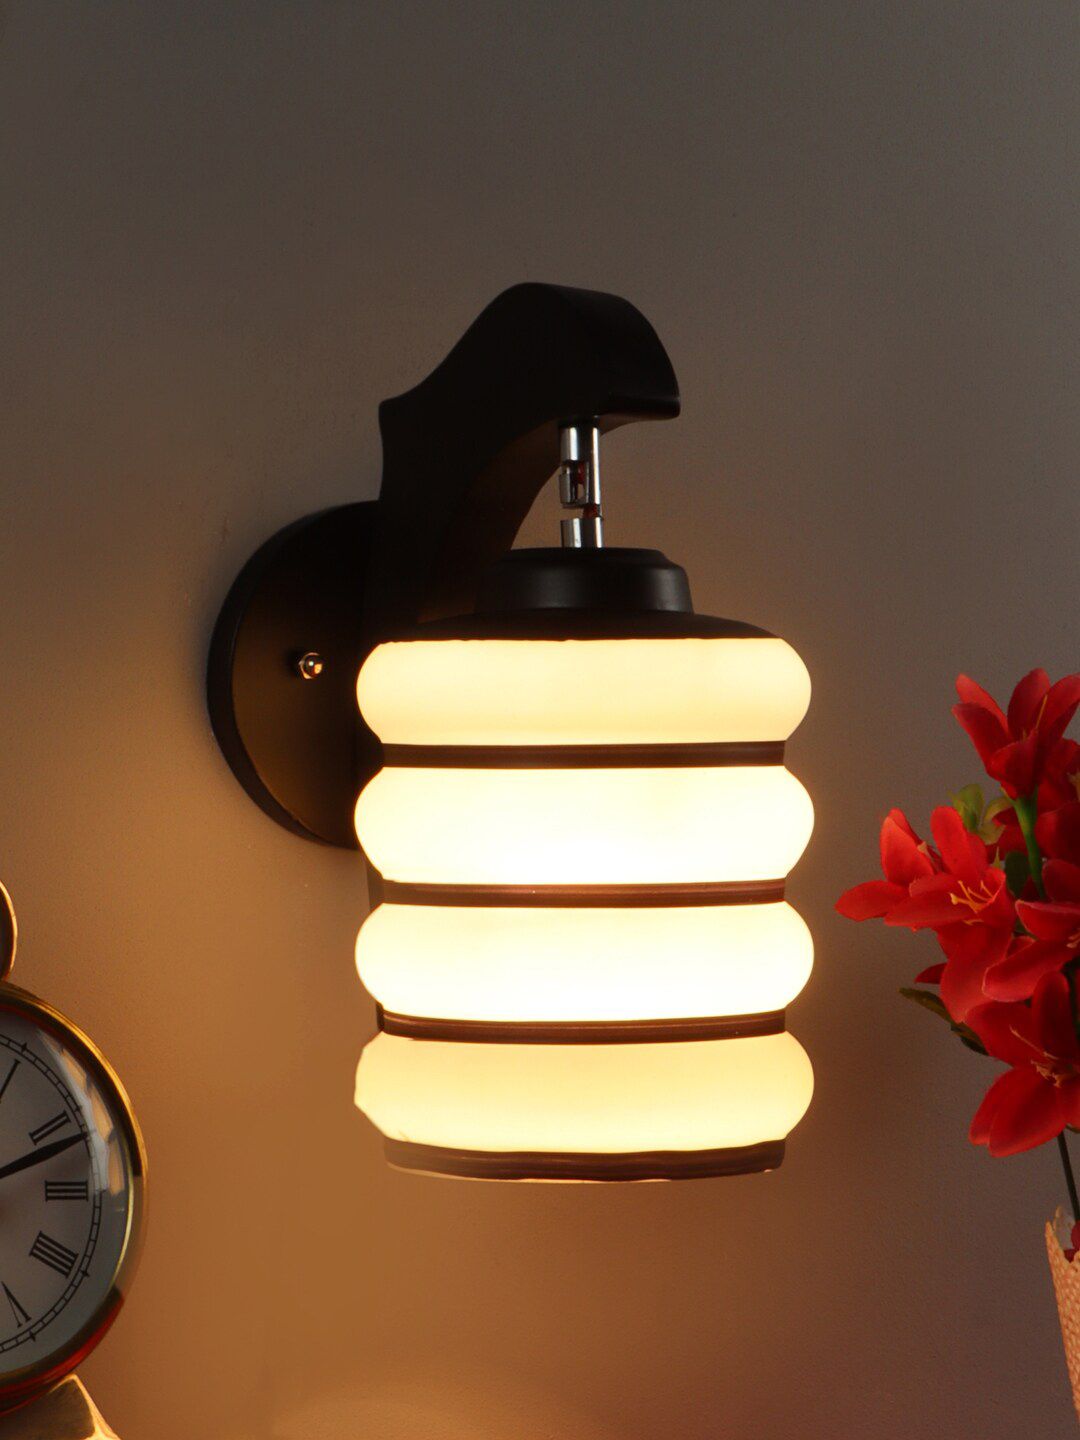 Foziq Brown Solid Wooden Cylinder Wall Lamp Price in India